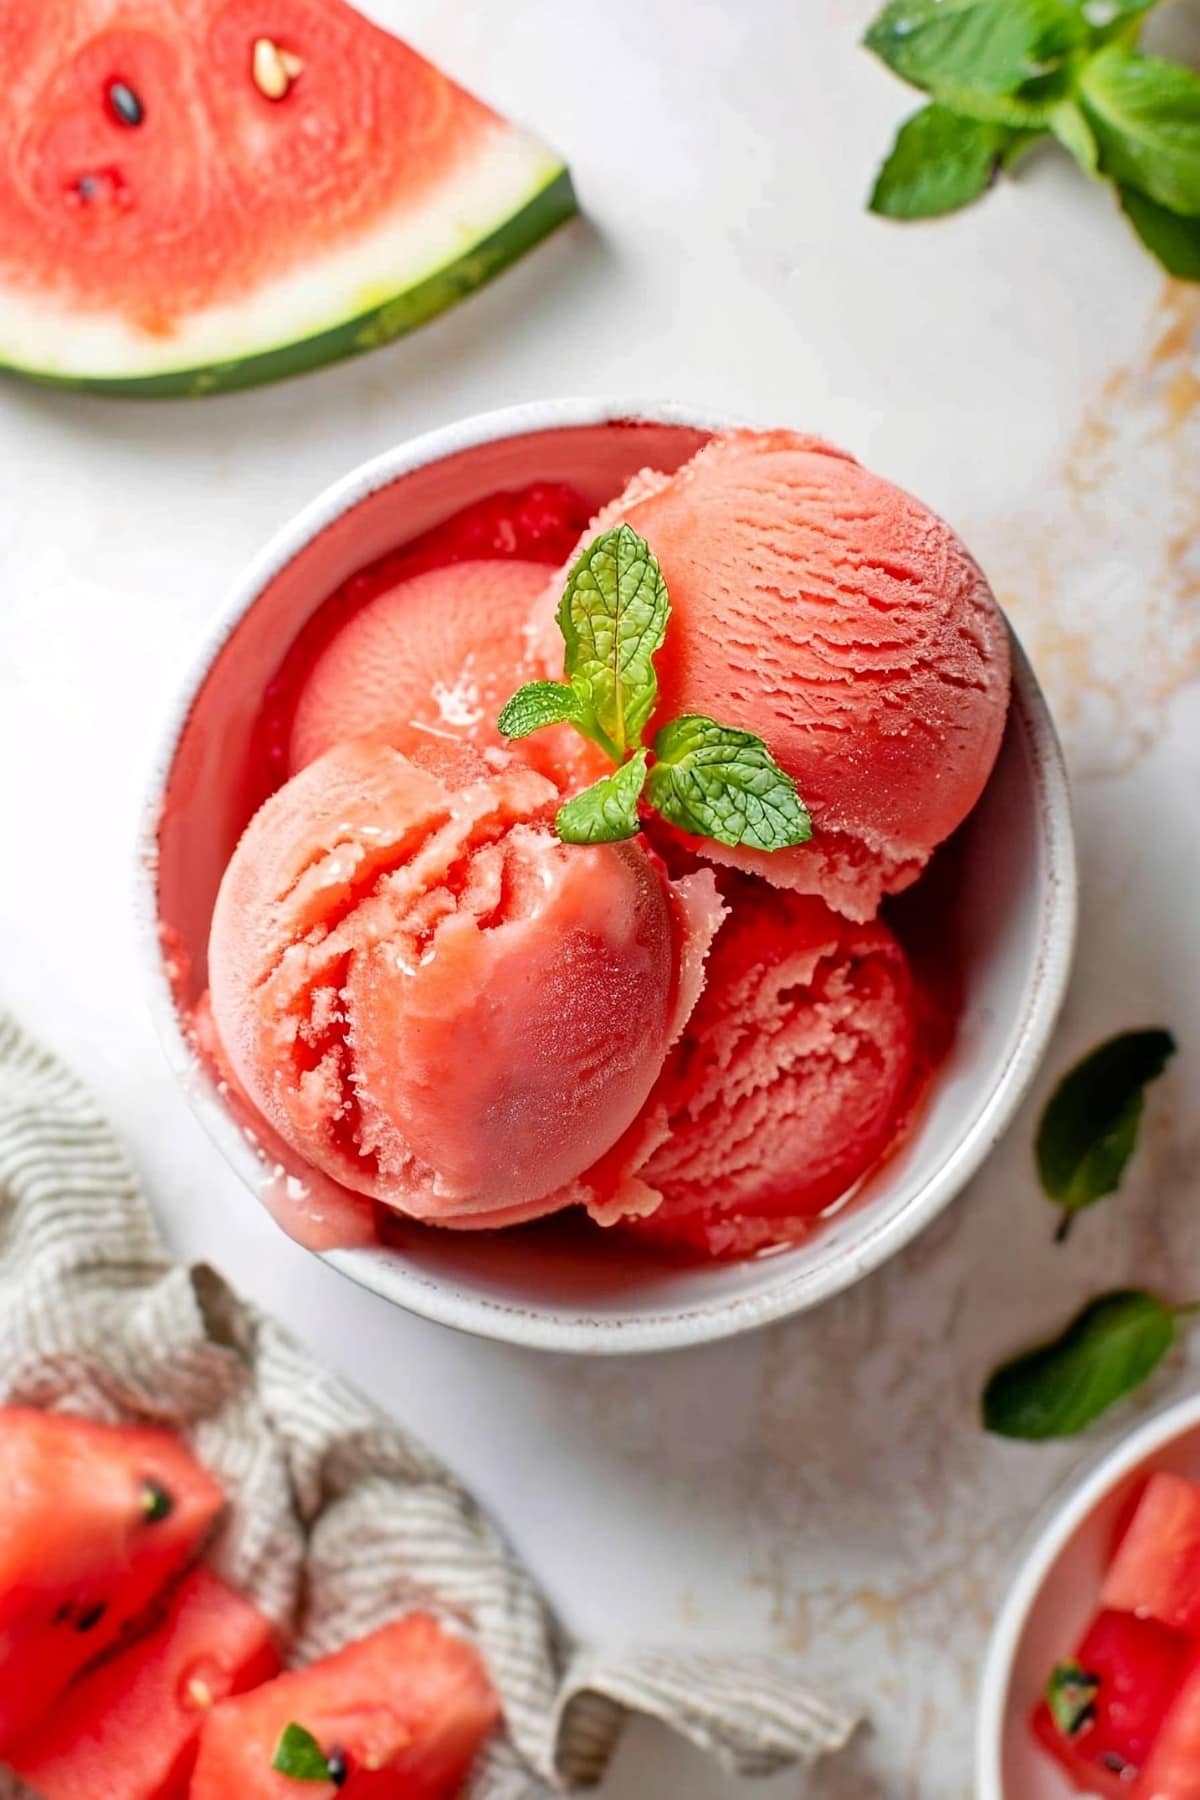 Scoops of homeamde watermelon sorbet with a hint of mint